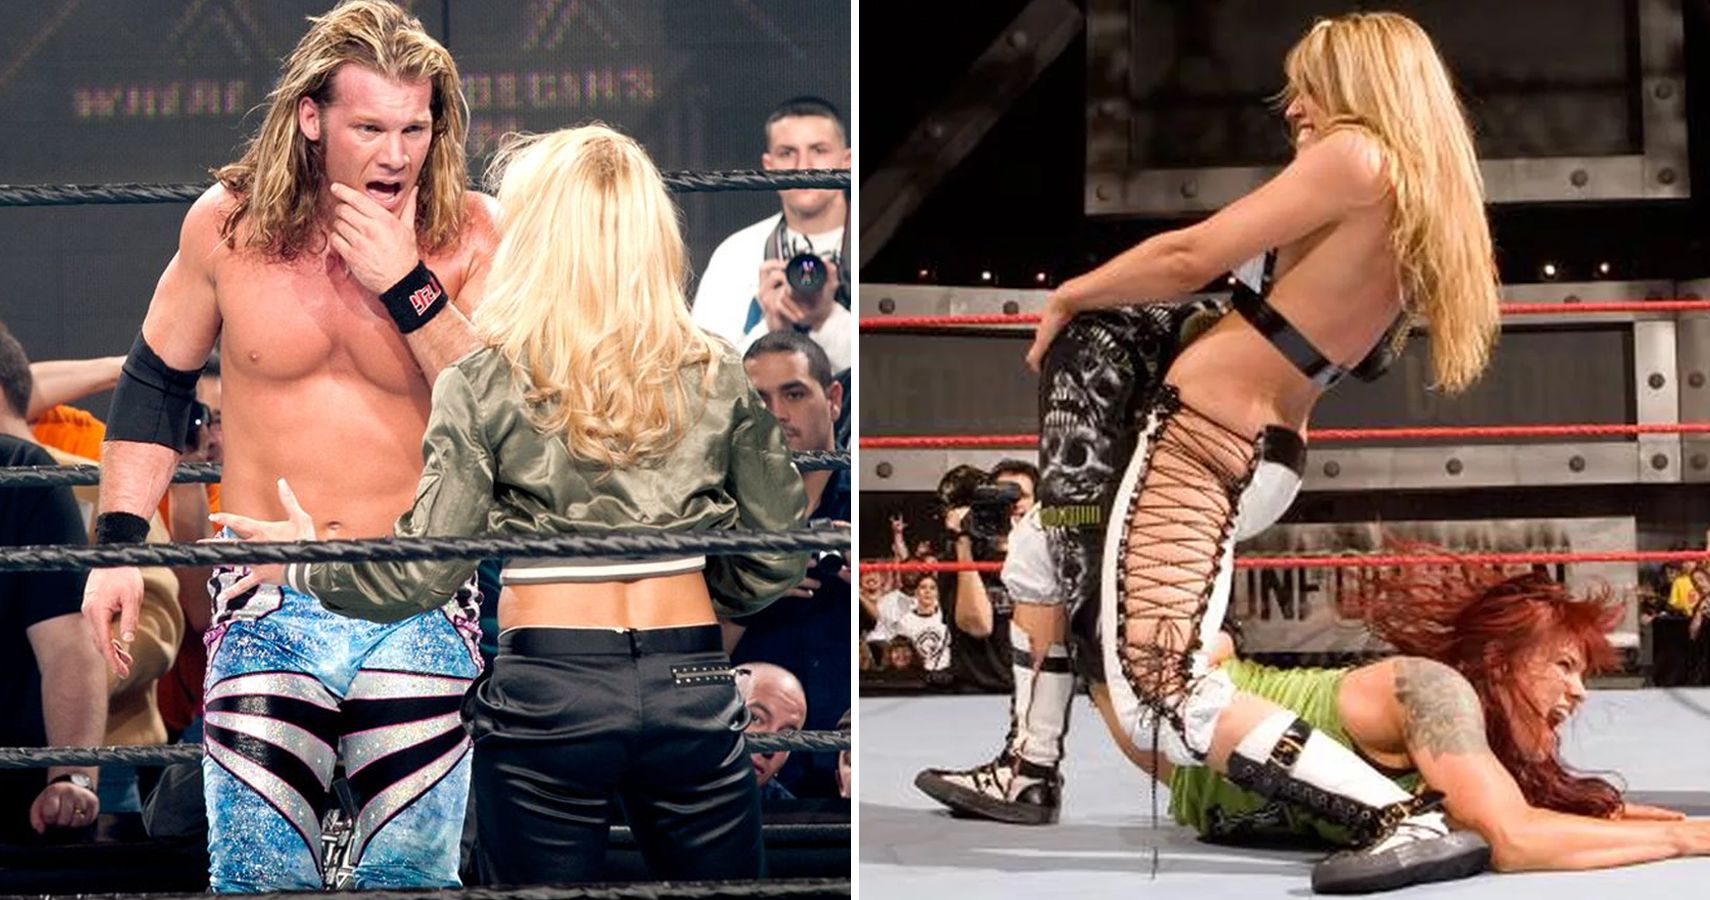 craig bellew recommends wwe trish status naked pic